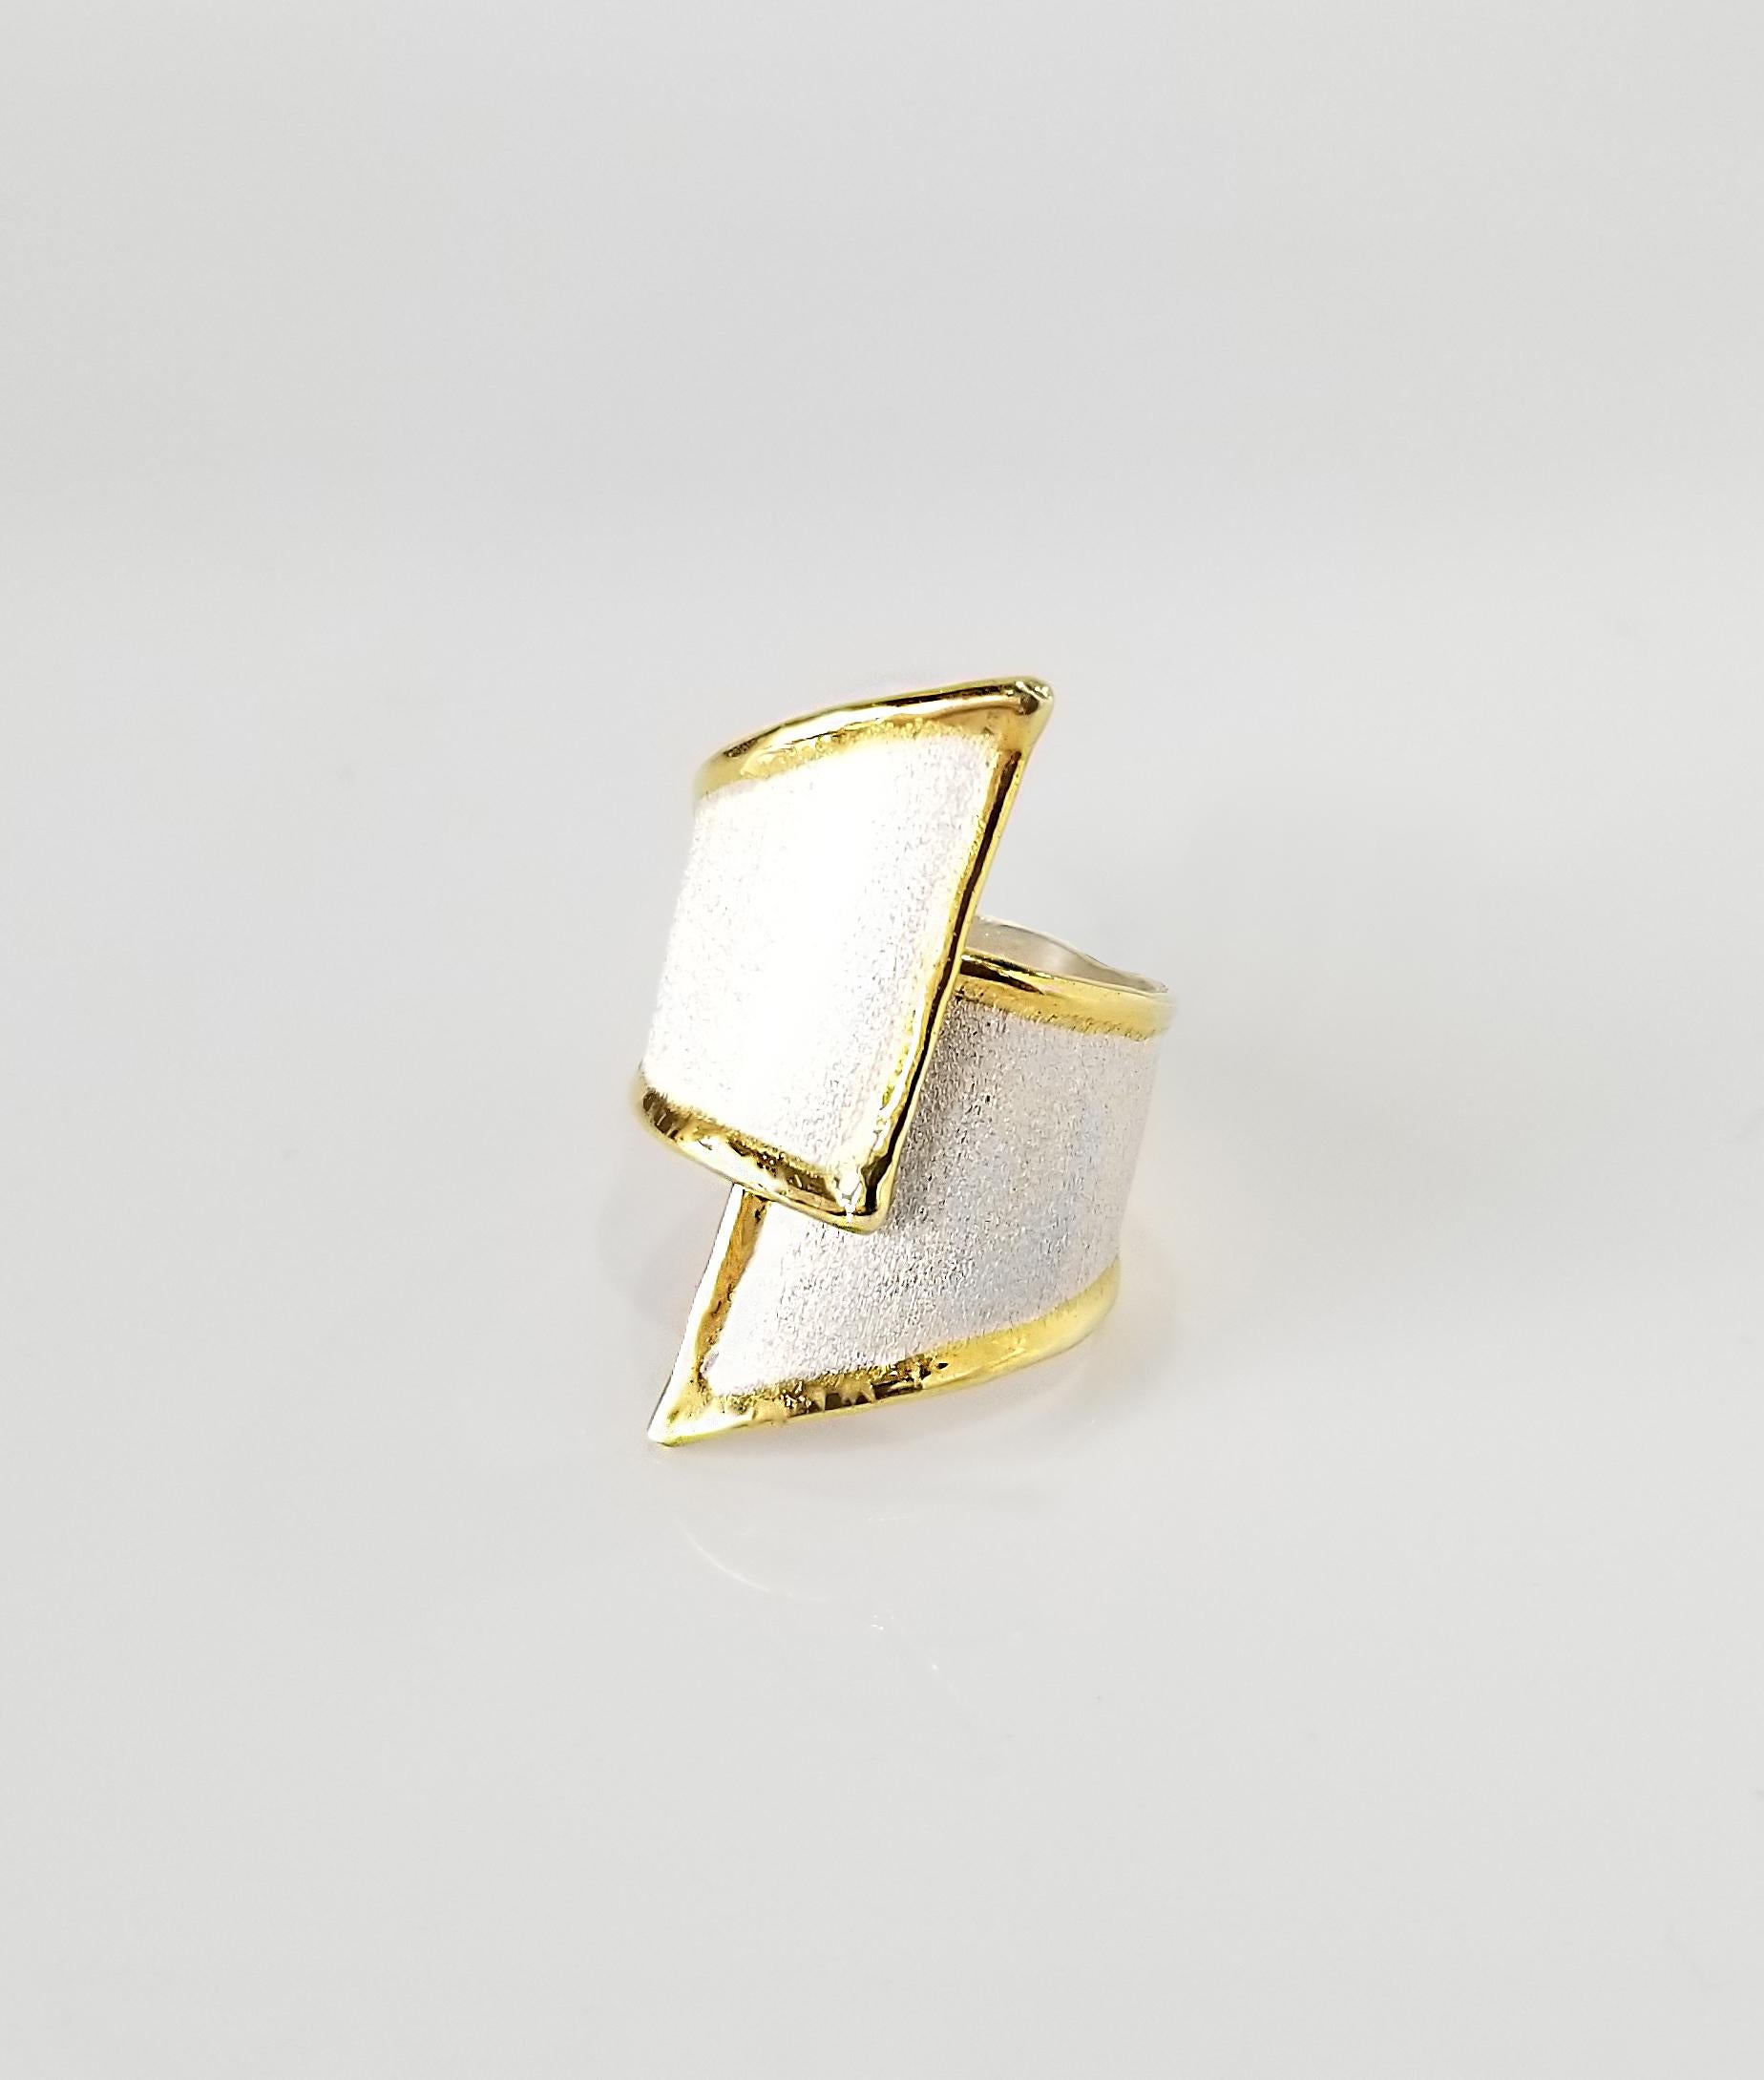 Presenting Yianni Creations Midas Collection handmade artisan ring from fine silver 950 purity plated with palladium to resist elements. Liquid edges are decorated with a thick overlay of 24 Karat Yellow Gold. The ring adjusts in size by its design,